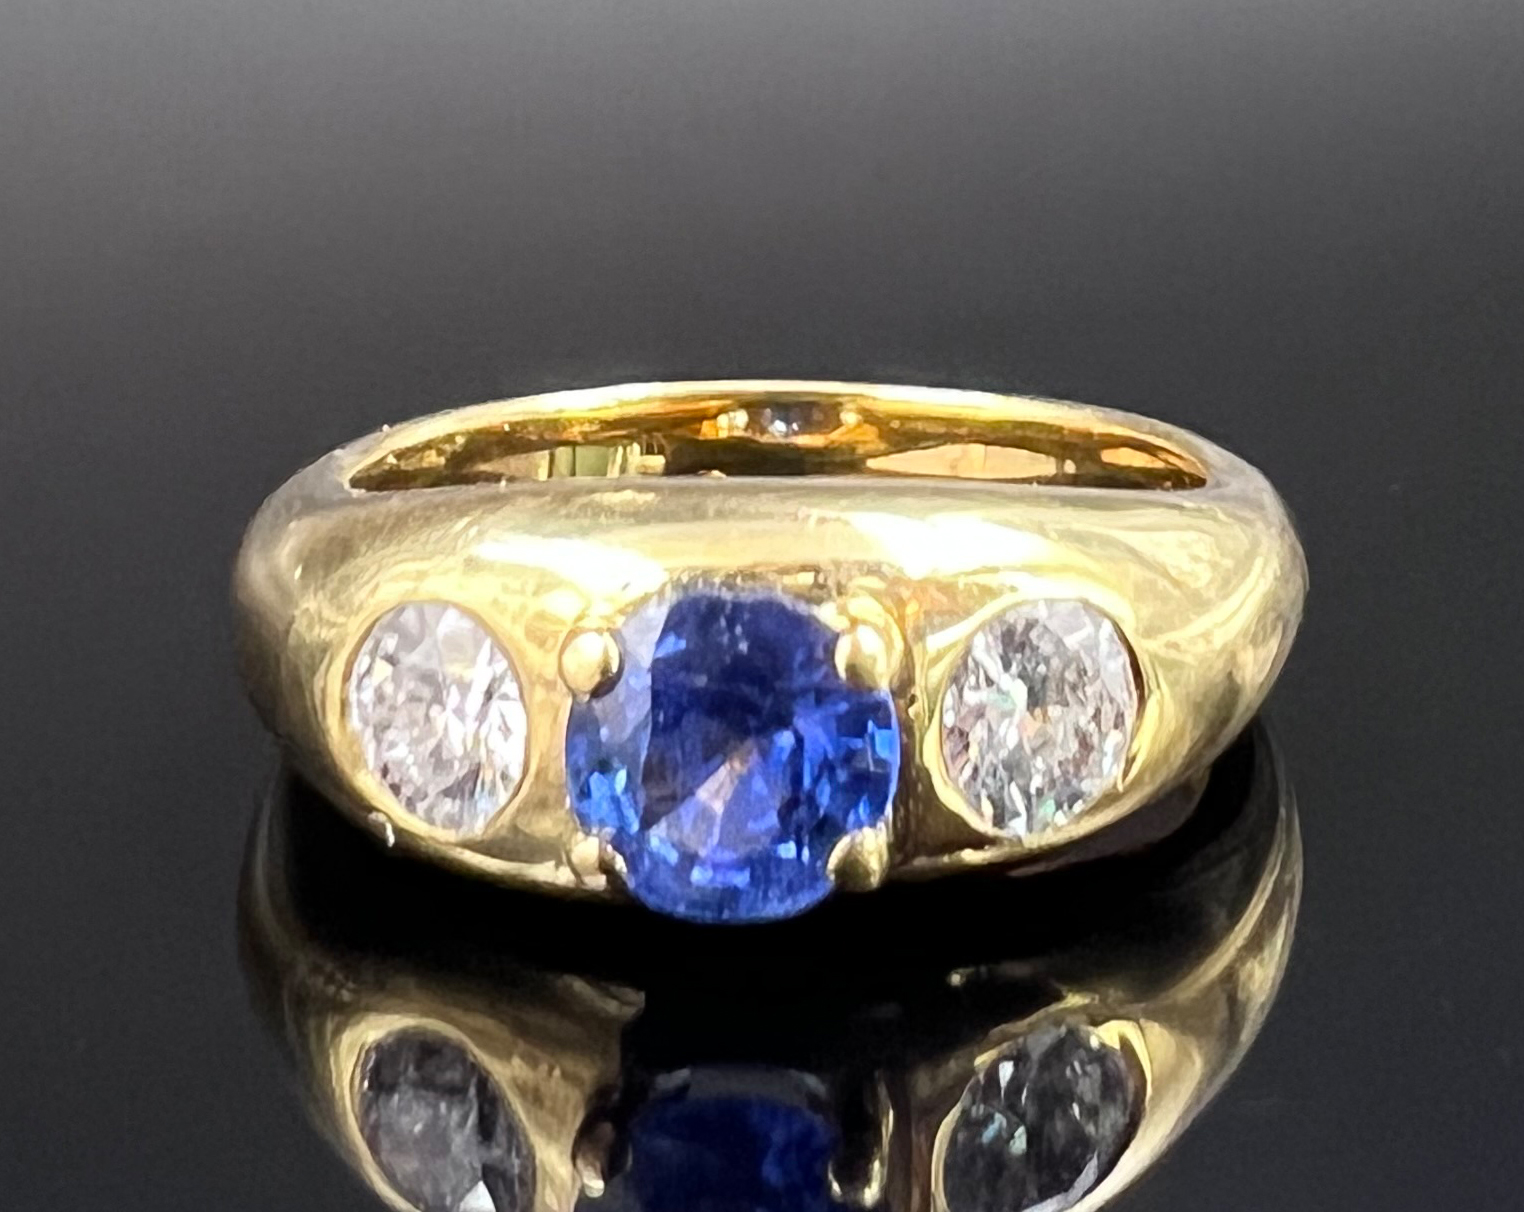 Ladies' ring. 750 yellow gold with 2 diamonds and a blue coloured stone.